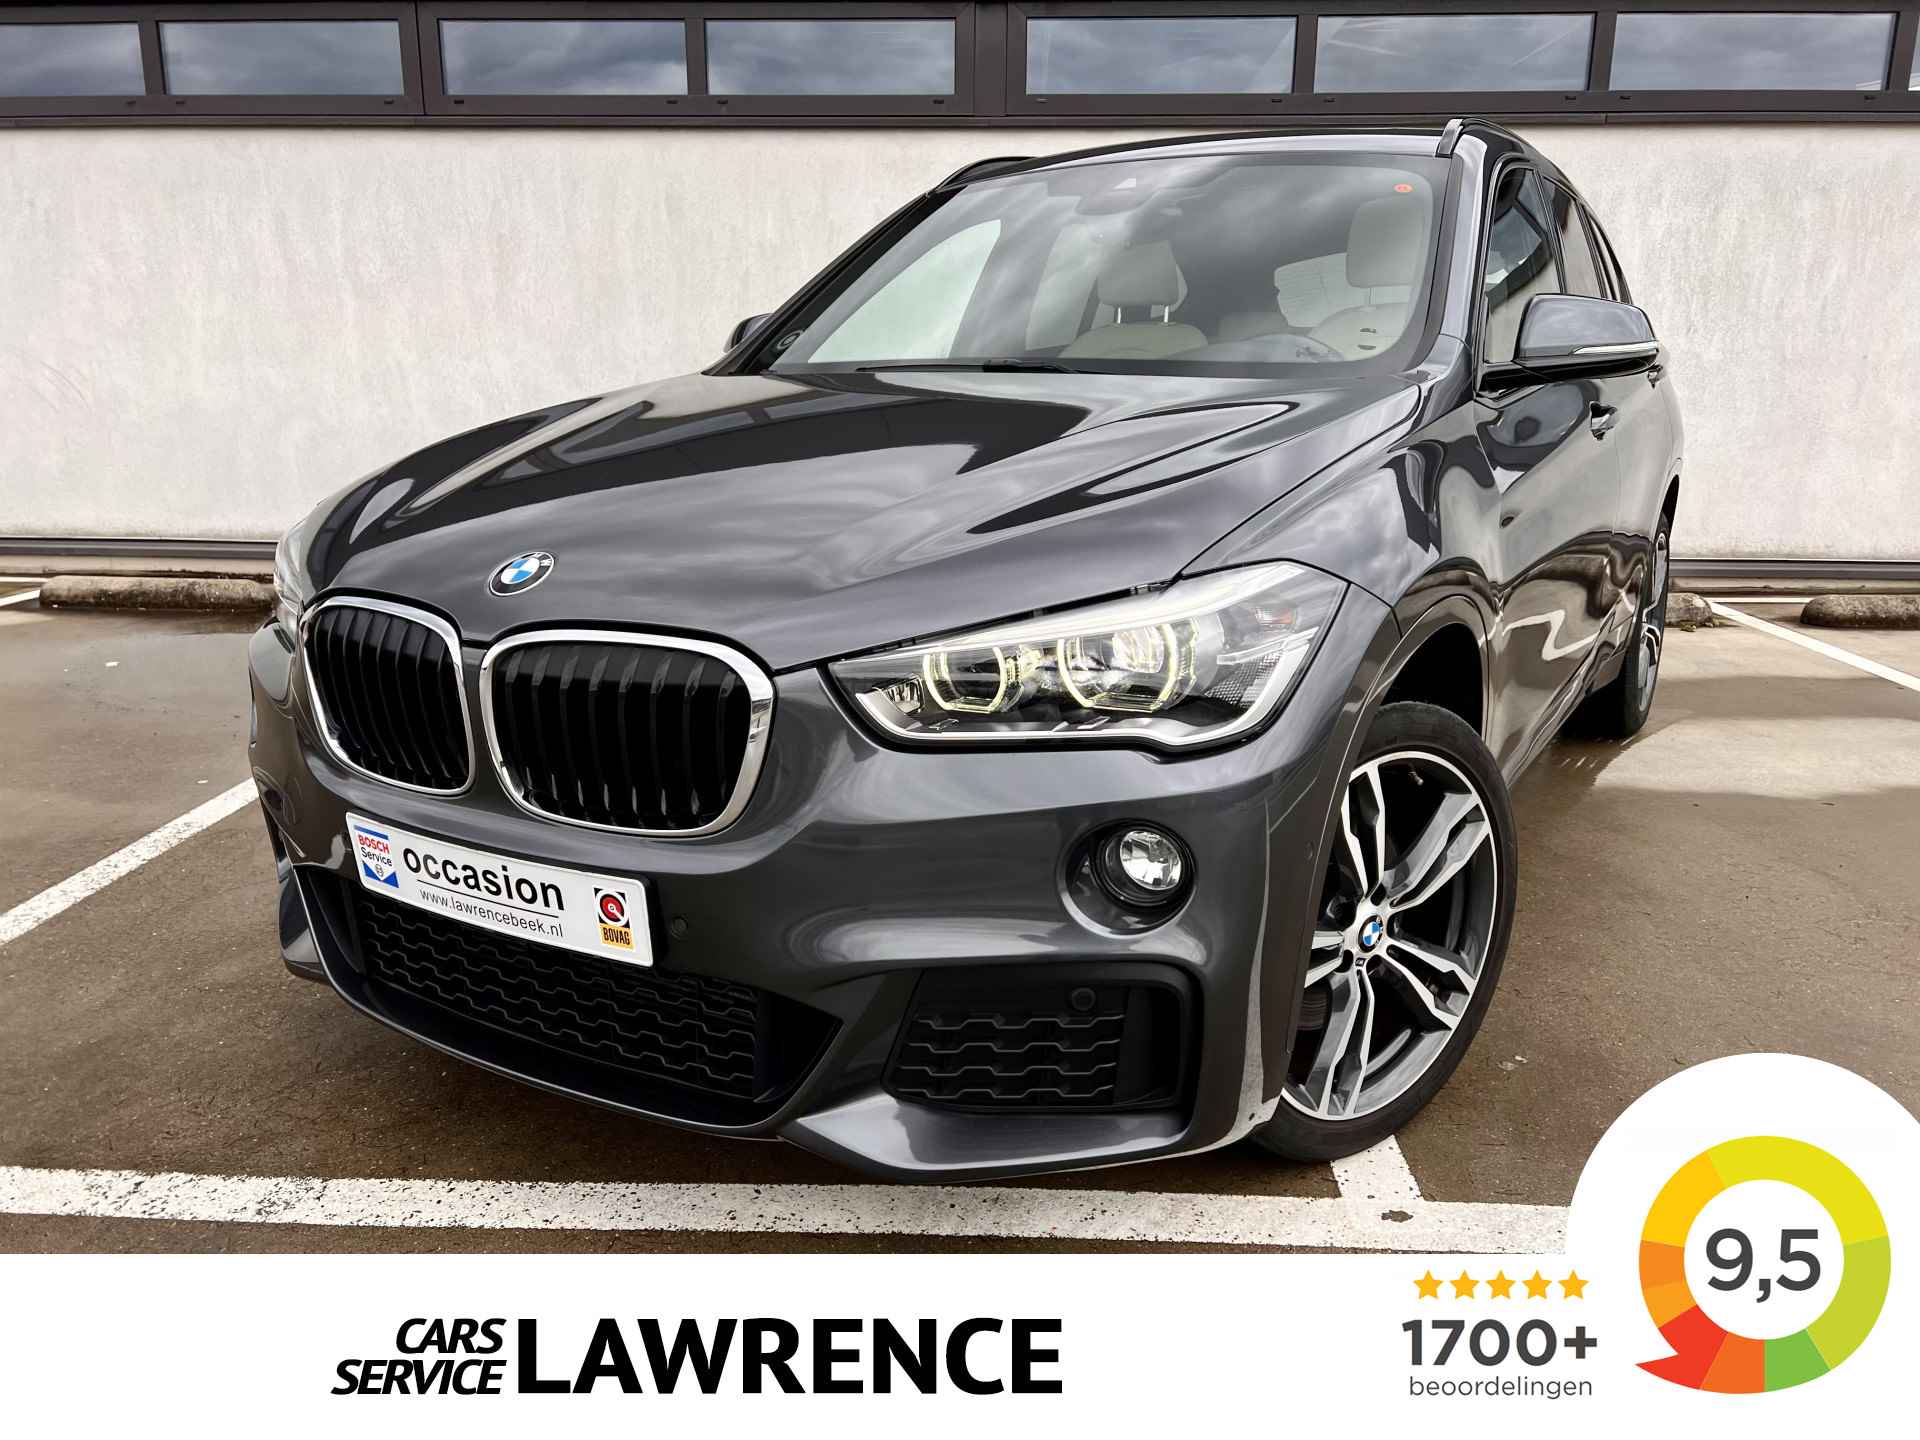 BMW X1 xDrive25i M Sport 231 PK | Leer | Pano |Head Up | Camera | % Bovag Occasion Partner % - 1/48